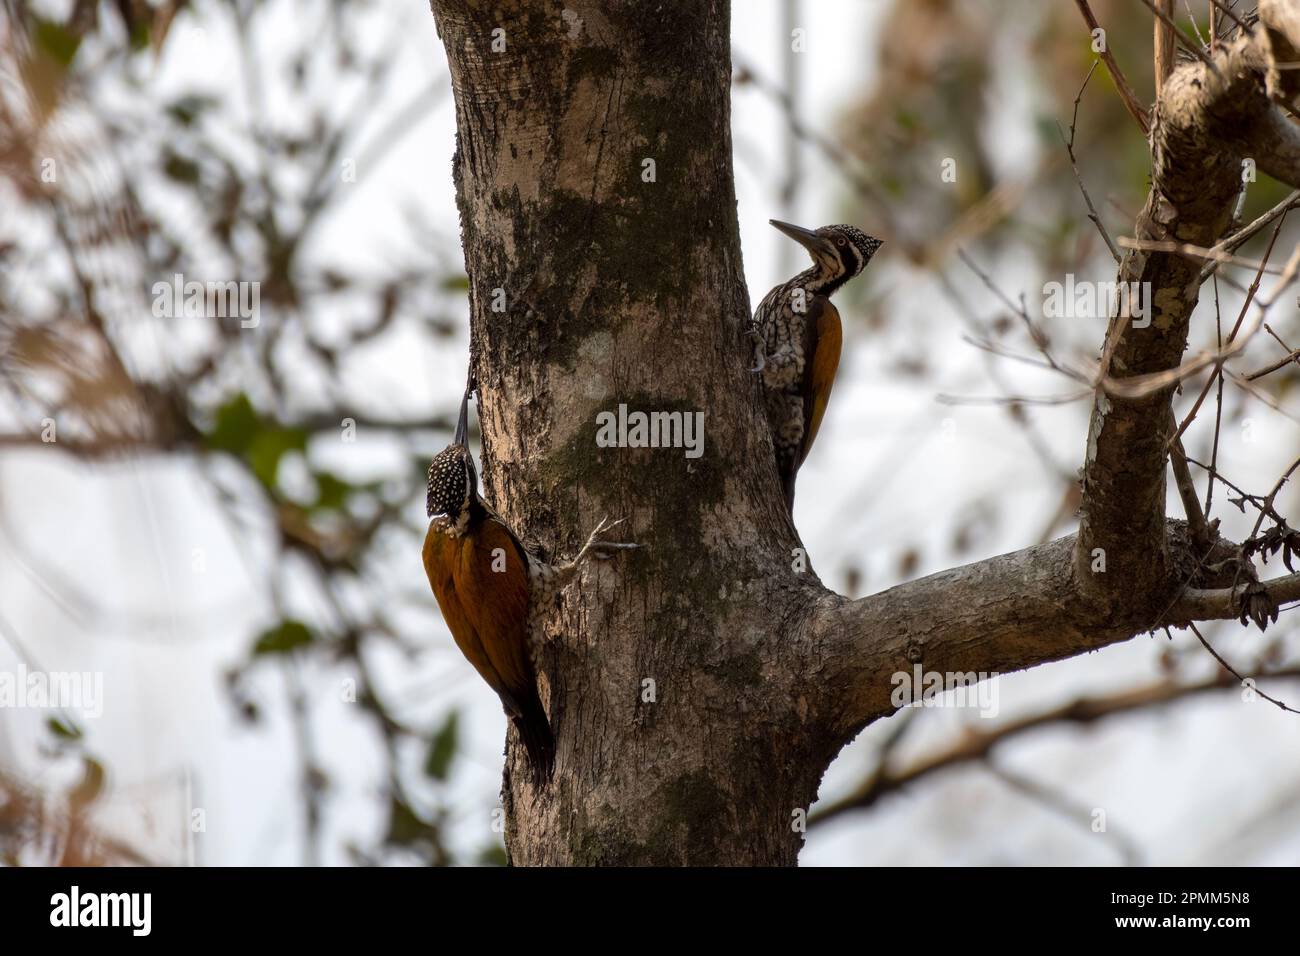 Greater flameback (Chrysocolaptes guttacristatus) also known as greater goldenback, large golden-backed woodpecker, observed in Rongtong in West Benga Stock Photo